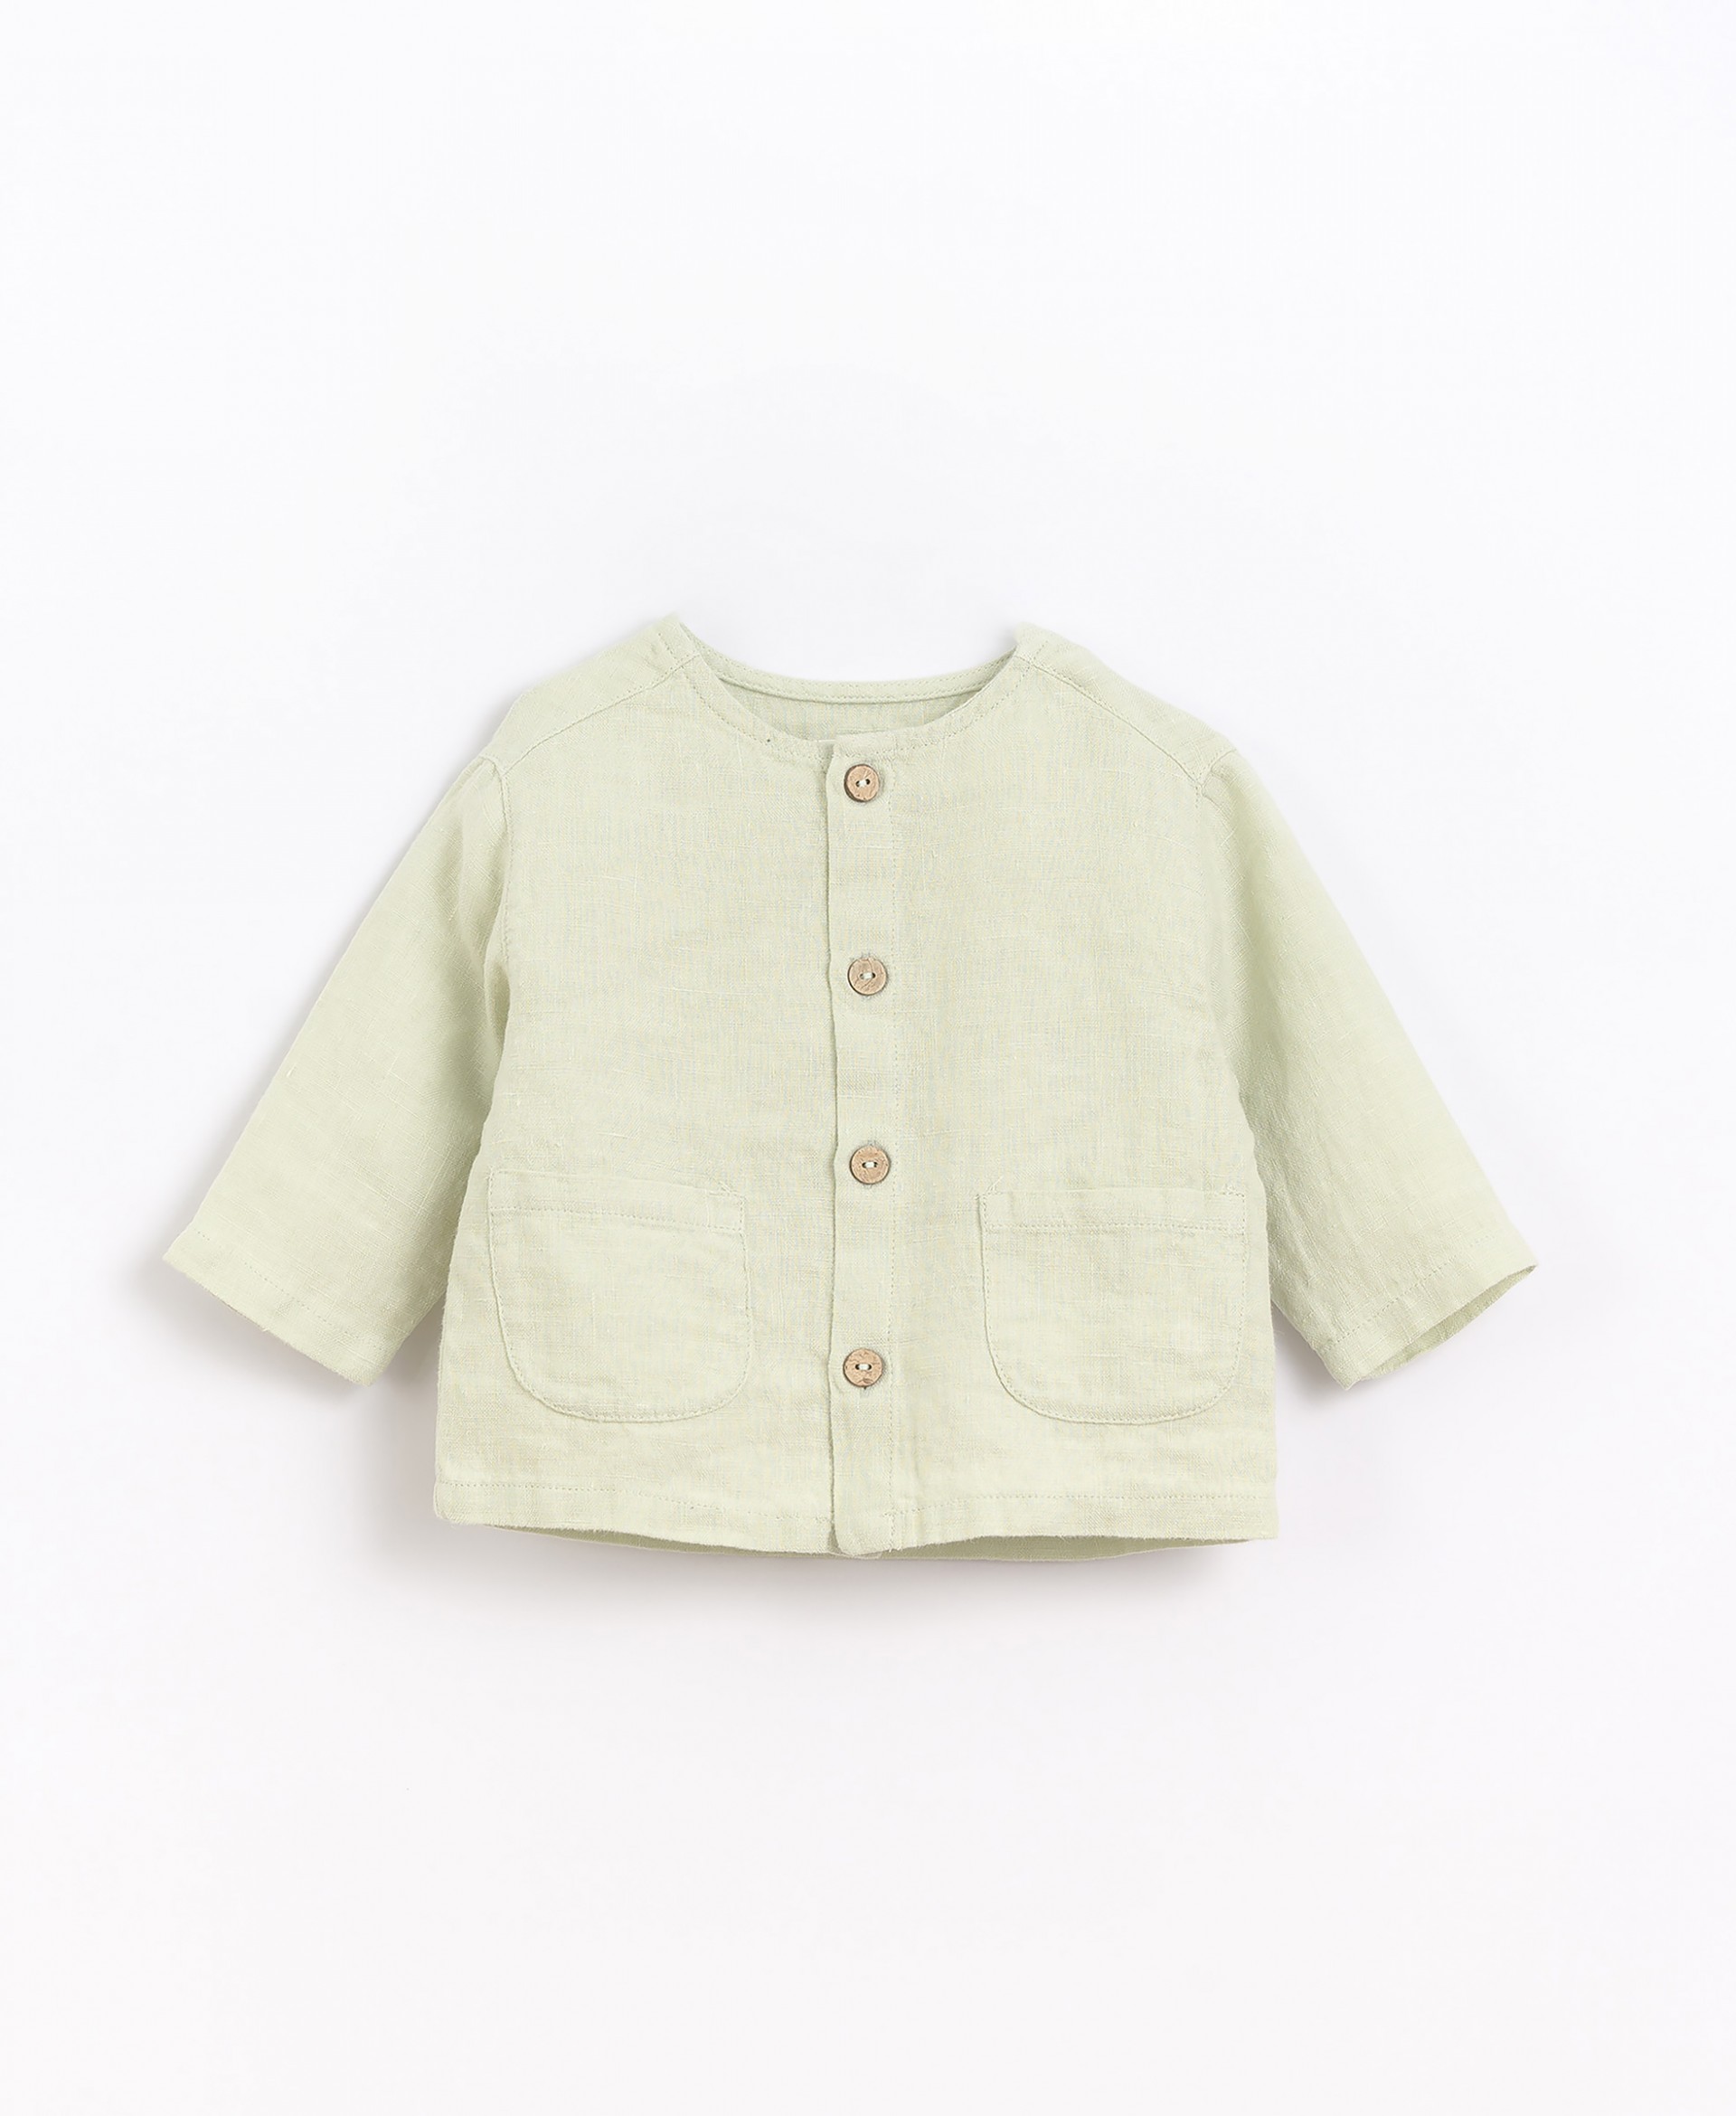 Linen shirt with pockets | Basketry